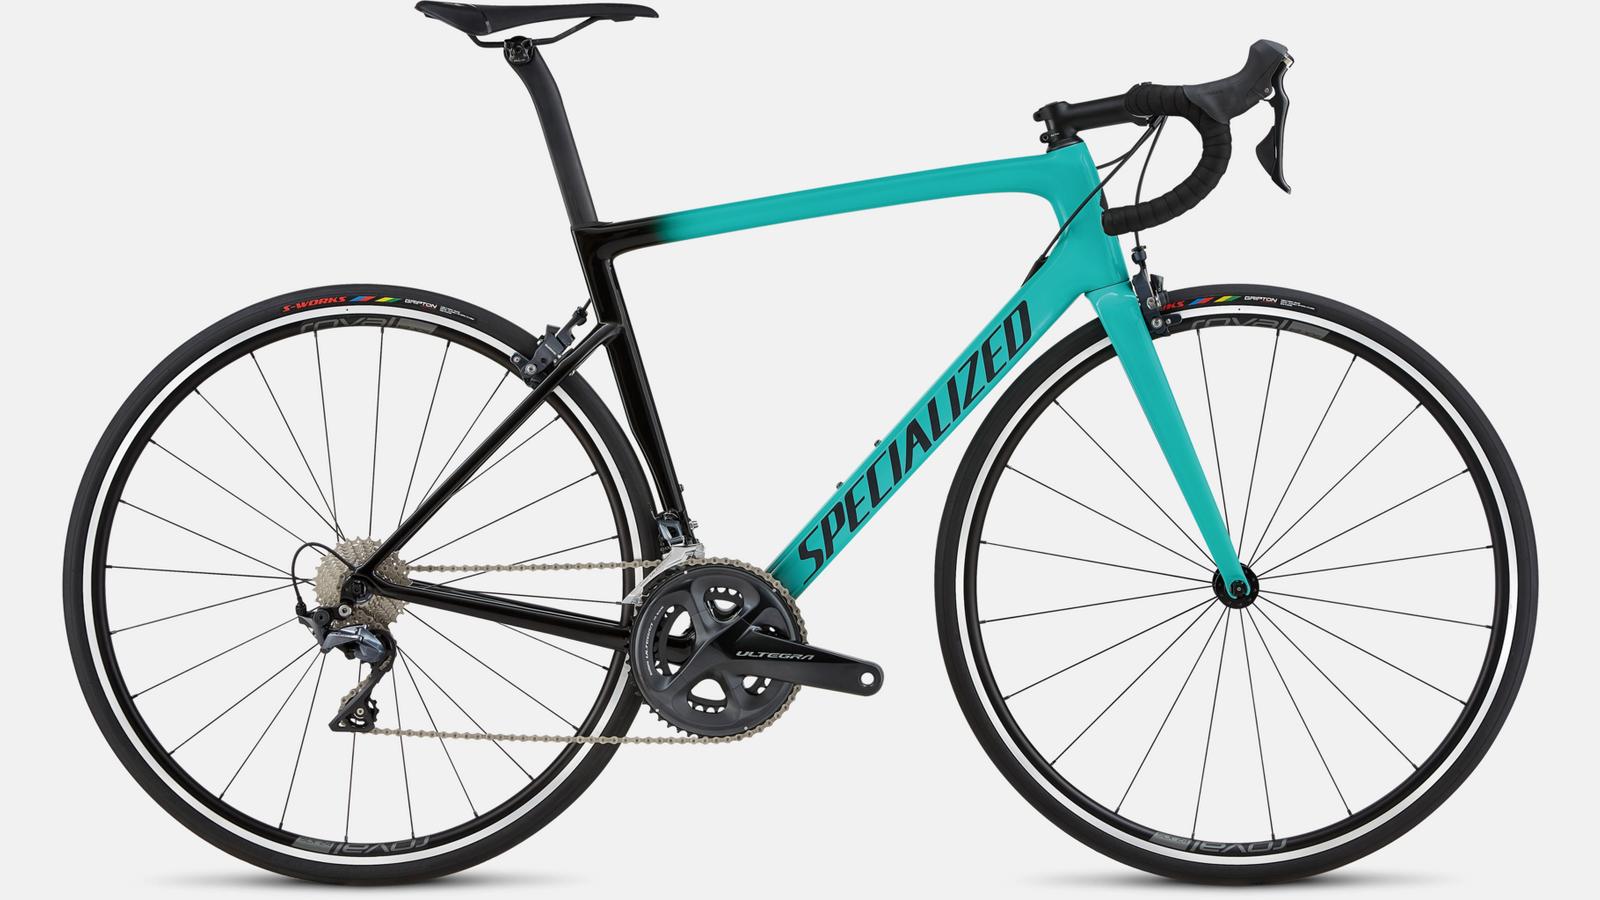 Touch-up paint for 2018 Specialized Men's Tarmac Expert - Gloss Acid Mint